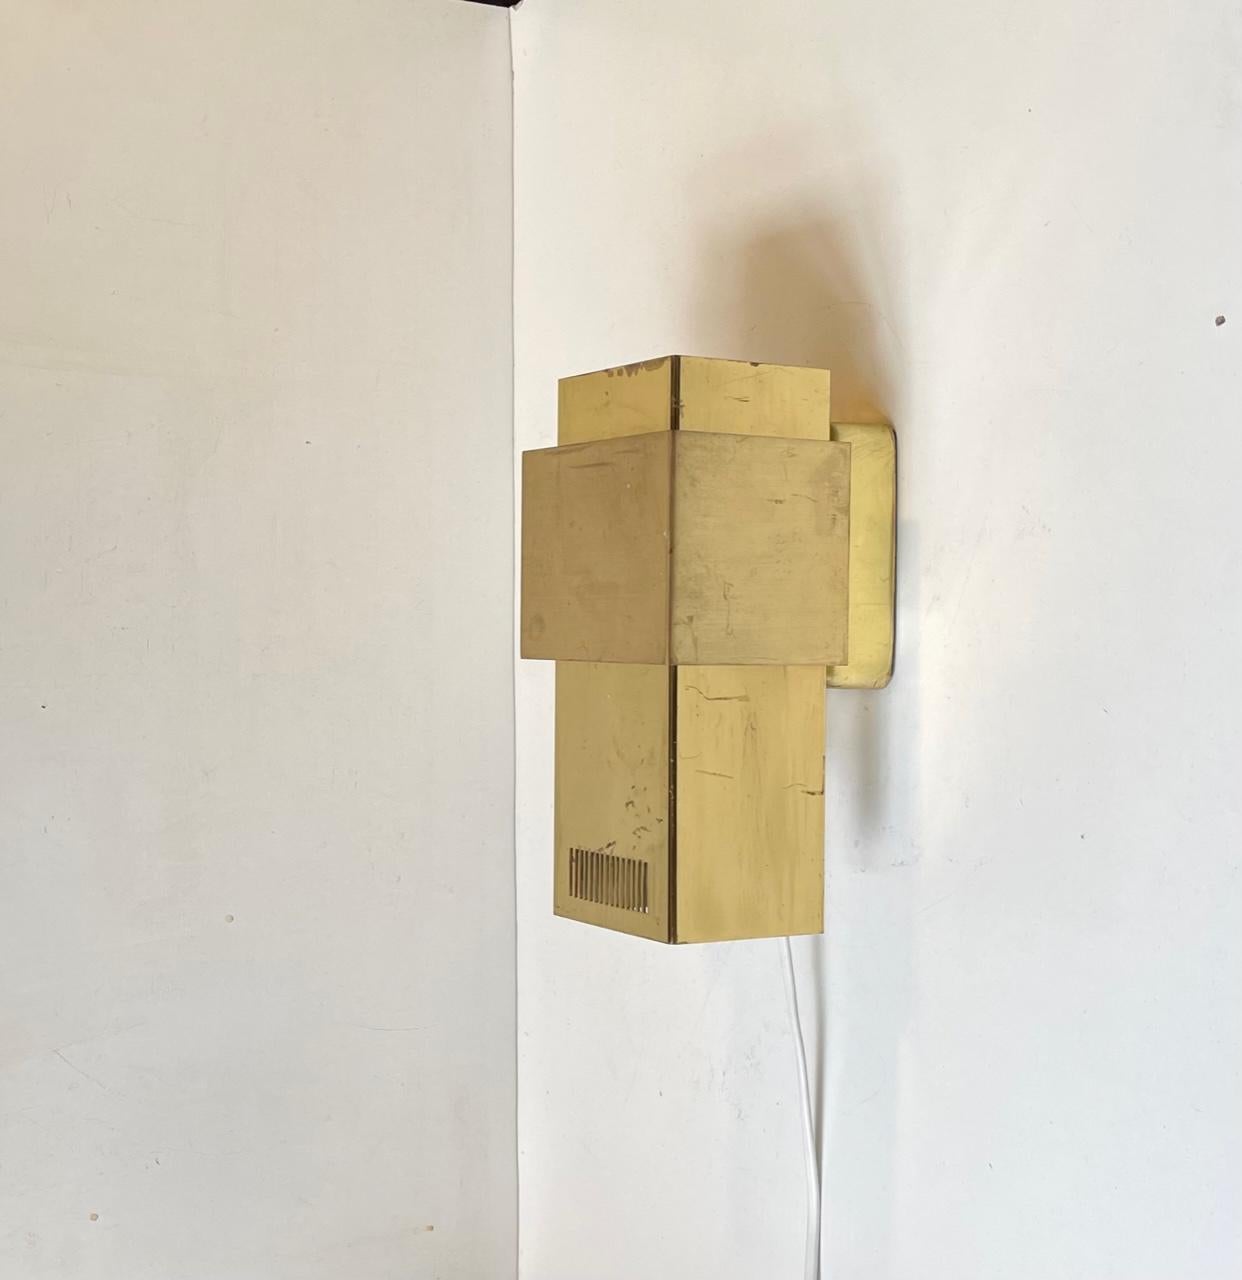 Unusual wall light in solid brass. Multiple shades/diffusers. Cubist - constructivist style in the manner of Curtis Jere and Preben Dahl. Unknown Swedish designer/maker circa 1960-75. Measurements: H: 23 cm, W: 12 cm, Dept: 12.5 cm. For the US. It